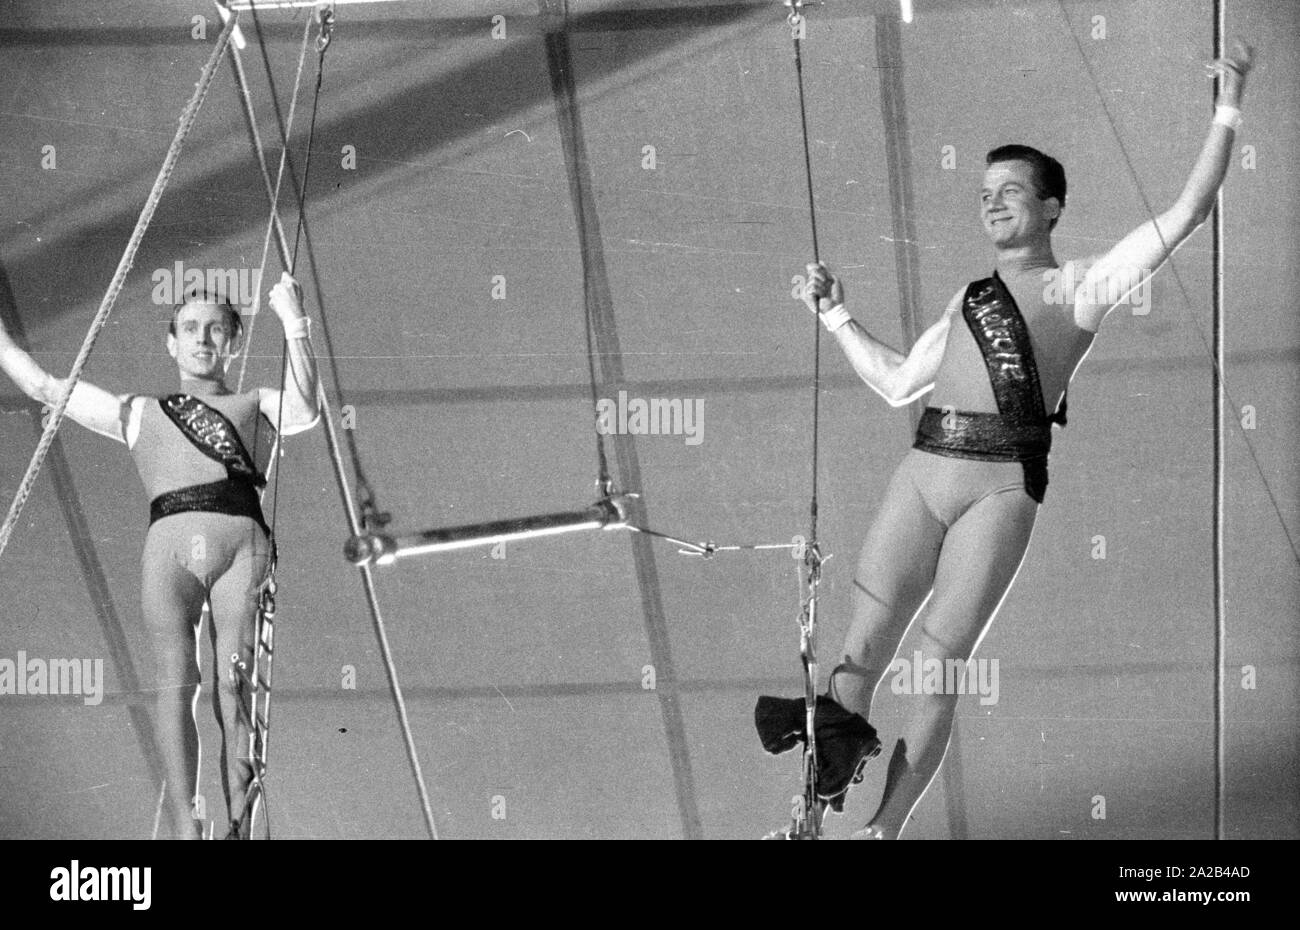 Shooting of the film 'Koenig der Manege' with Rudolf Schock, Germaine Damar and Fritz Imhoff in the main roles. The picture shows Rudolf Schock (right) and Hans Putz as acrobats. High above in the circus tent, they practice for an artistic performance. Stock Photo